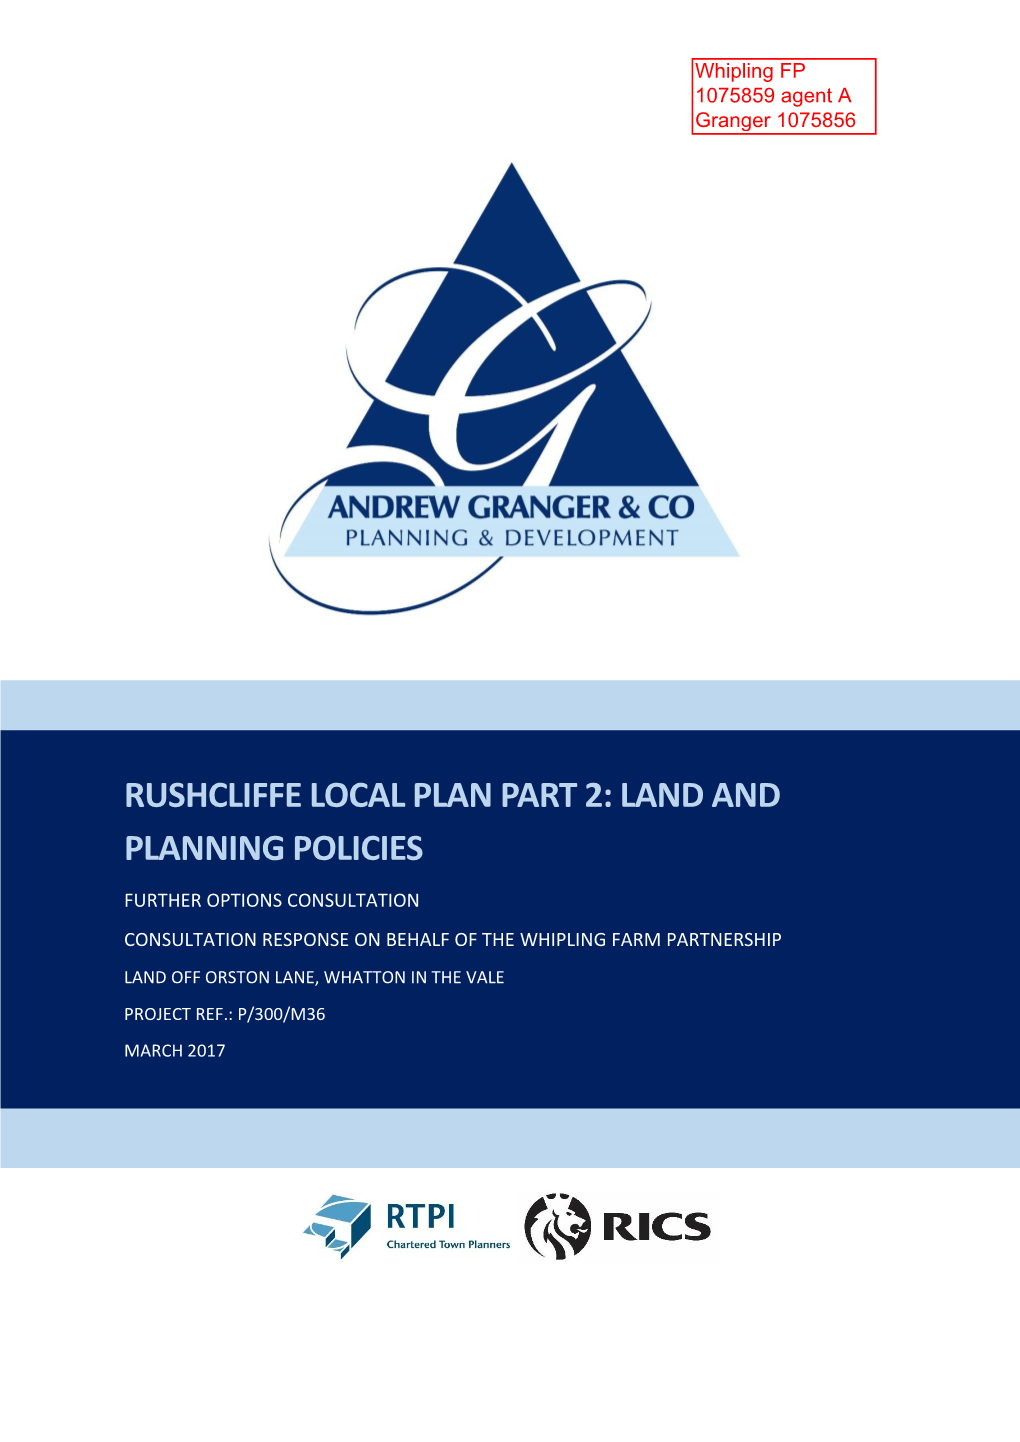 Rushcliffe Local Plan Part 2: Land and Planning Policies